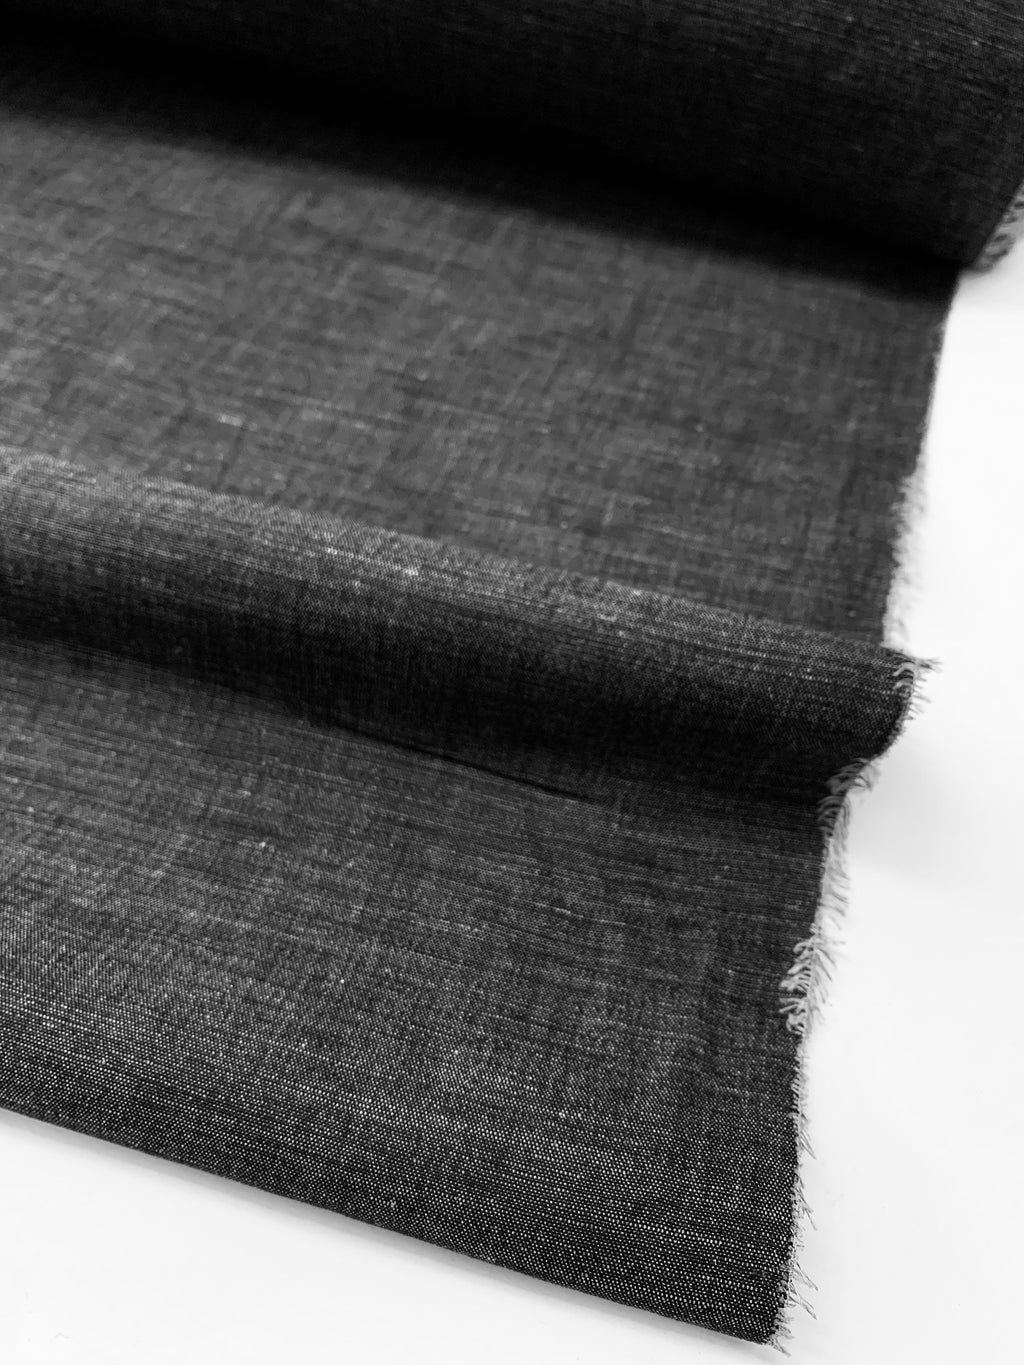 Apparel Fabric – The Selvedge Society